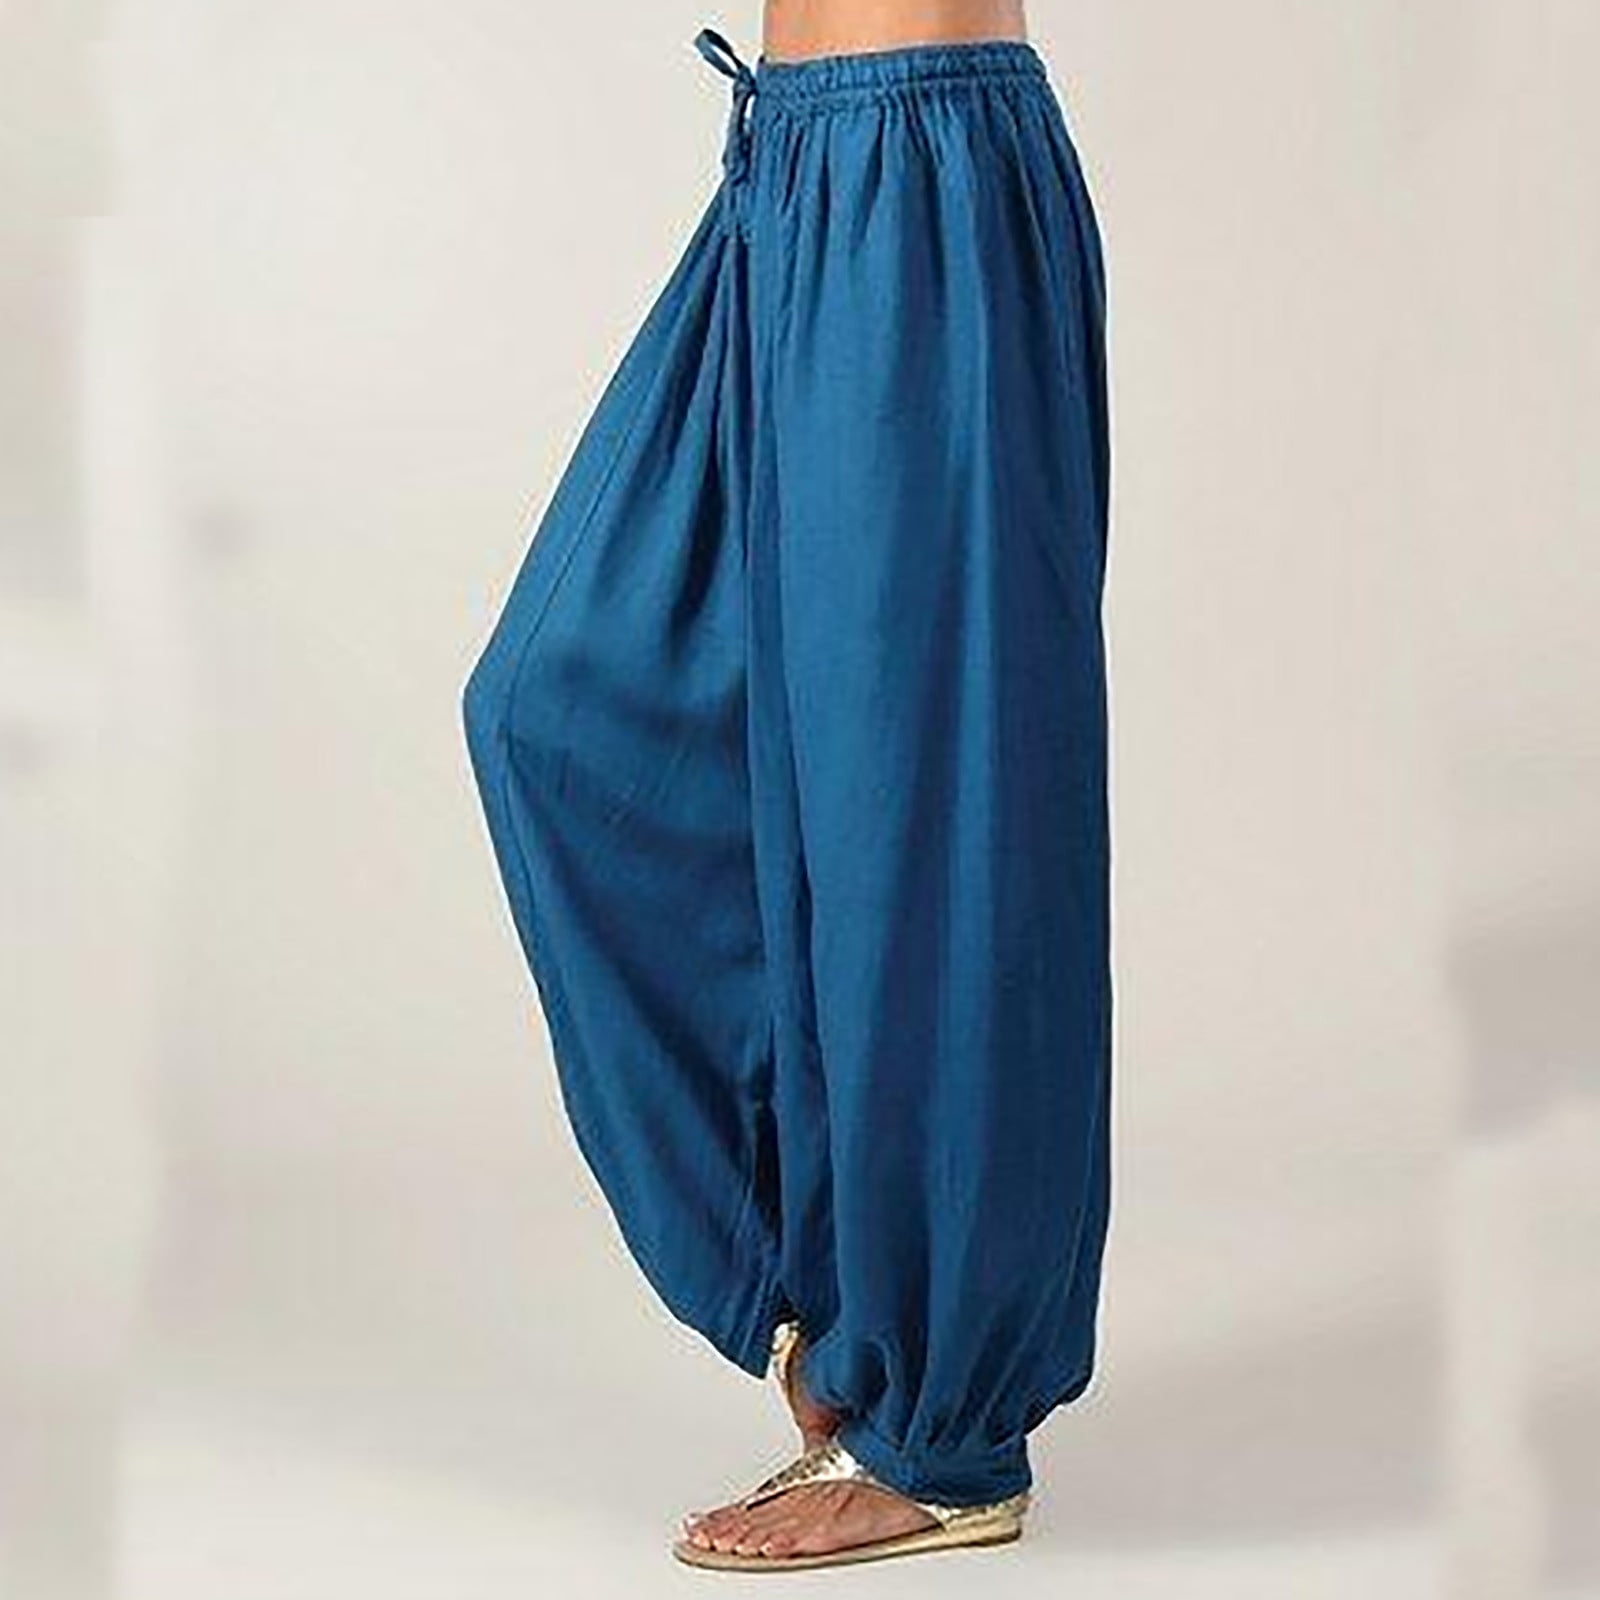 Shop New Look Women's Harem Trousers up to 70% Off | DealDoodle